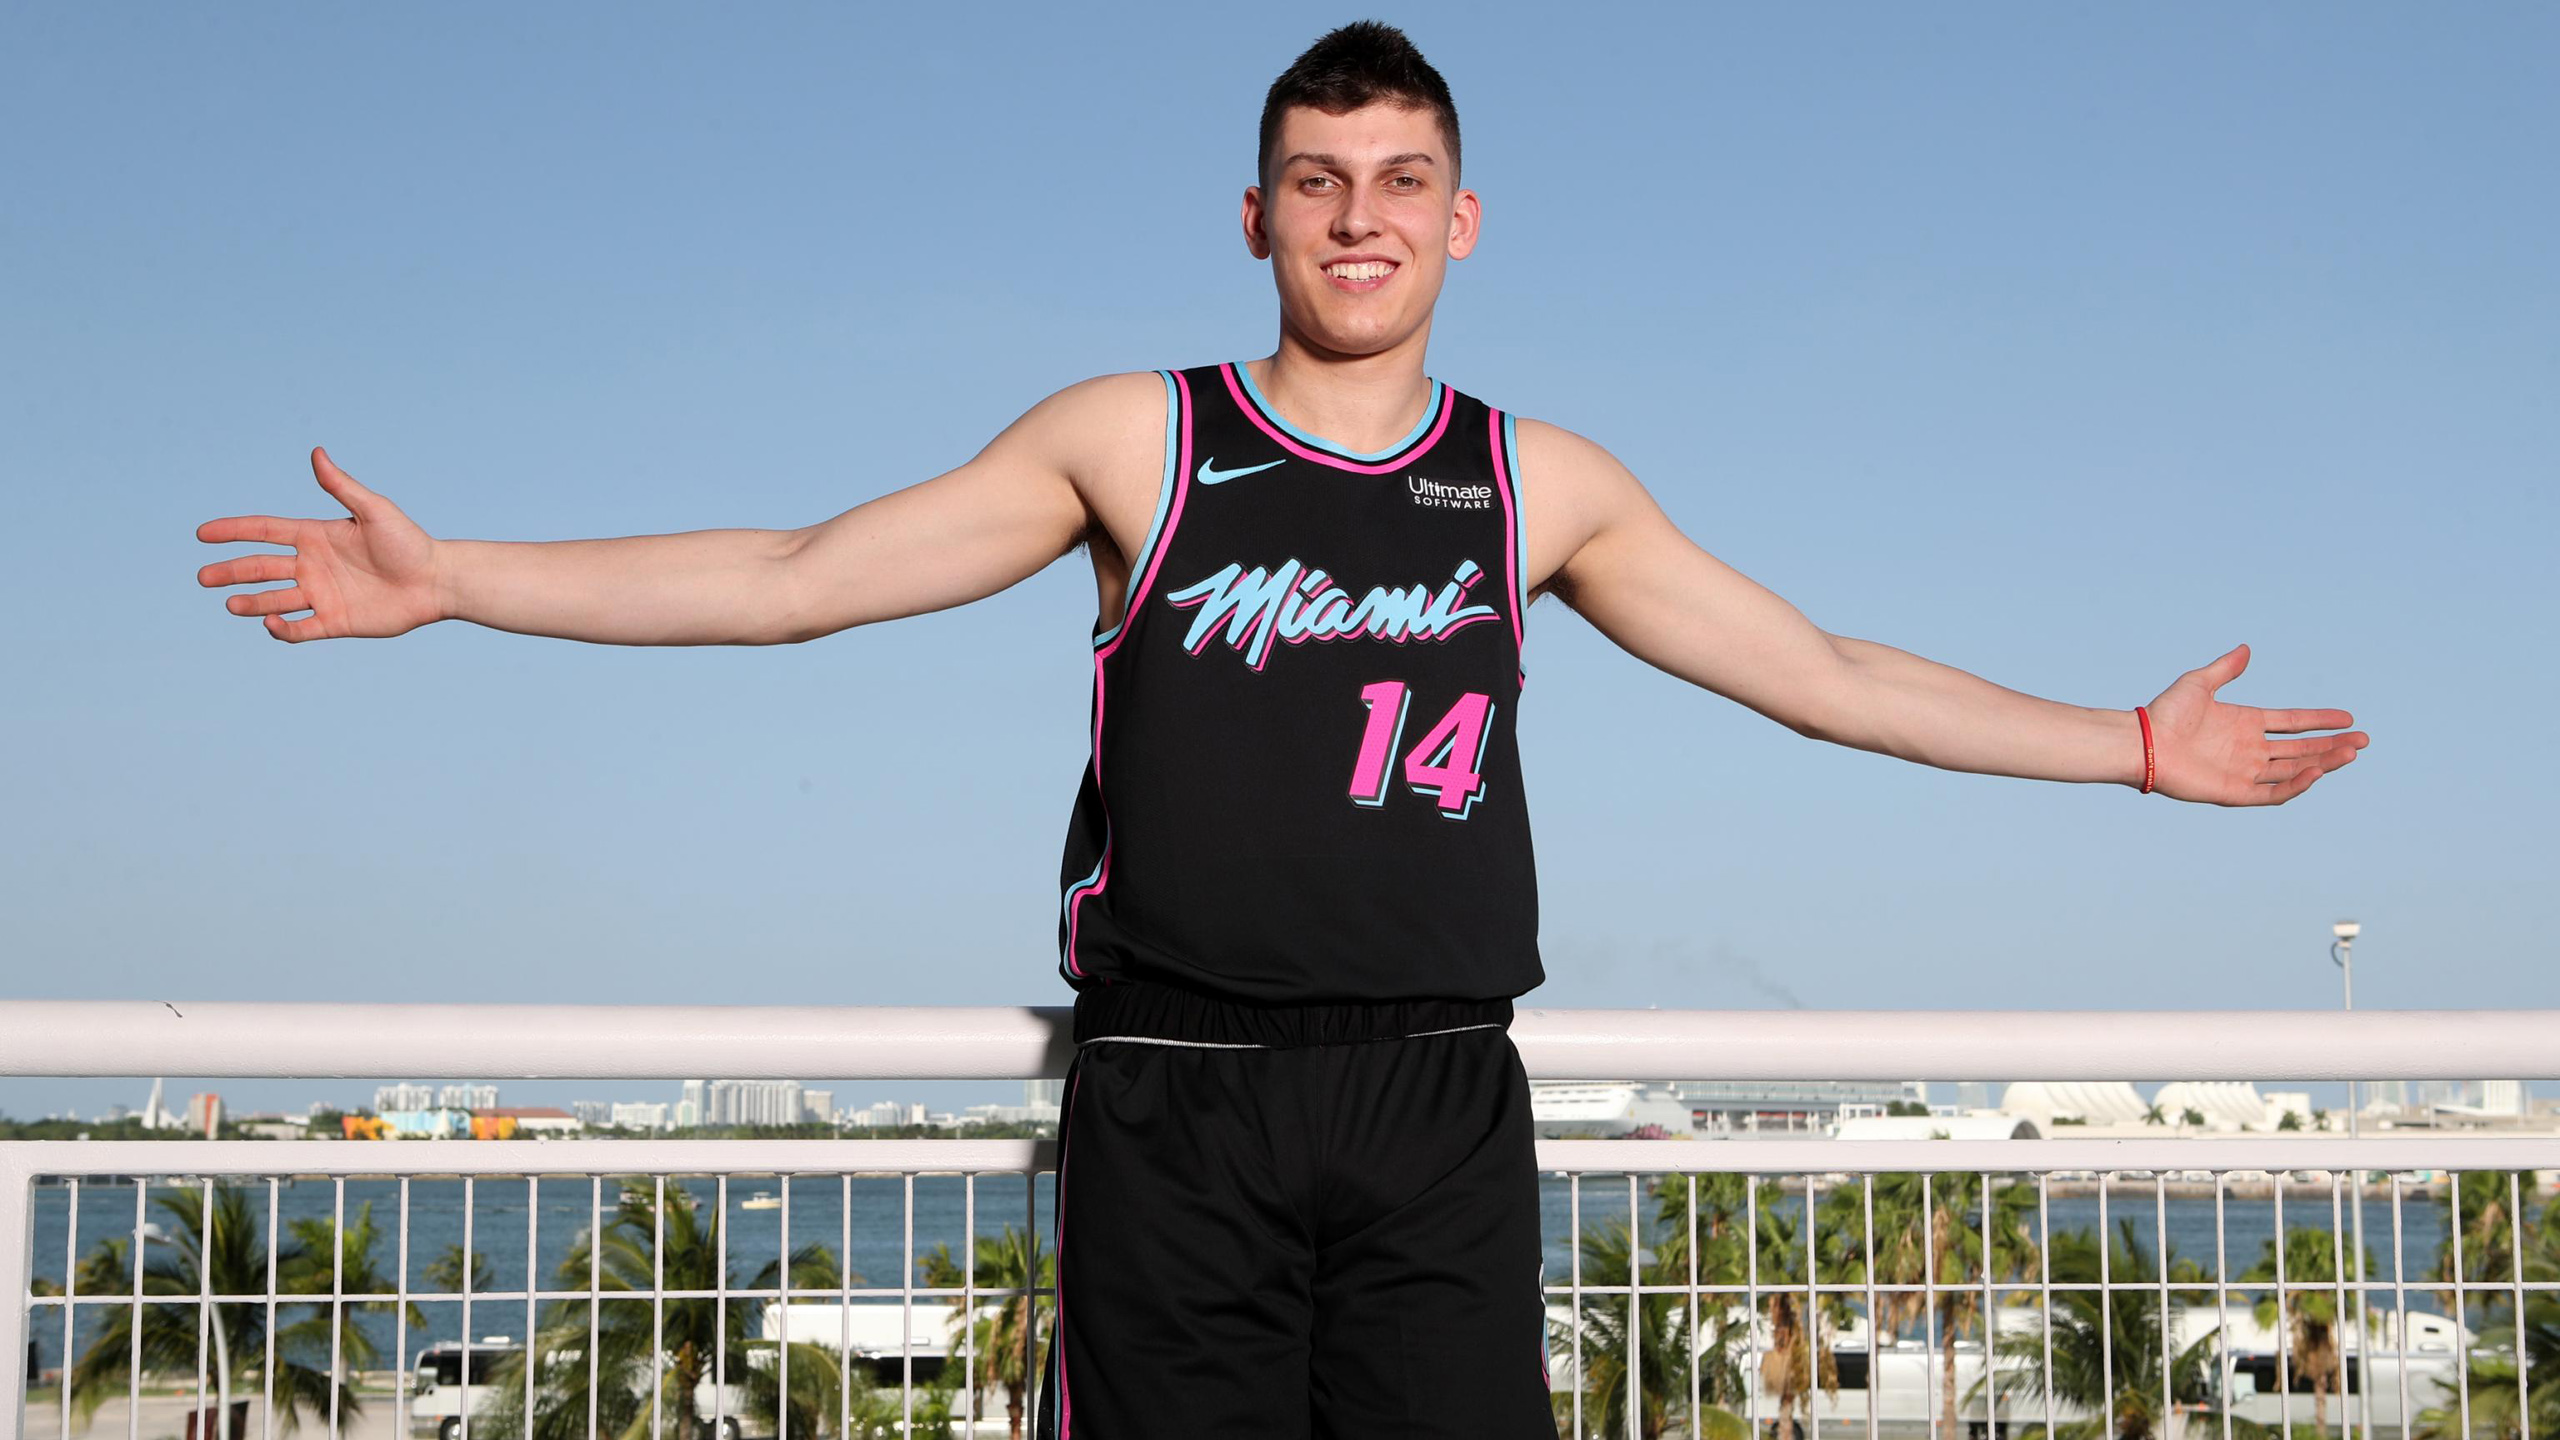 Smiley Cute Tyler Herro Is Showing Hands In The Air Wearing Black Dress While Posing For A Photo In A Scenery Wallpaper Basketball HD